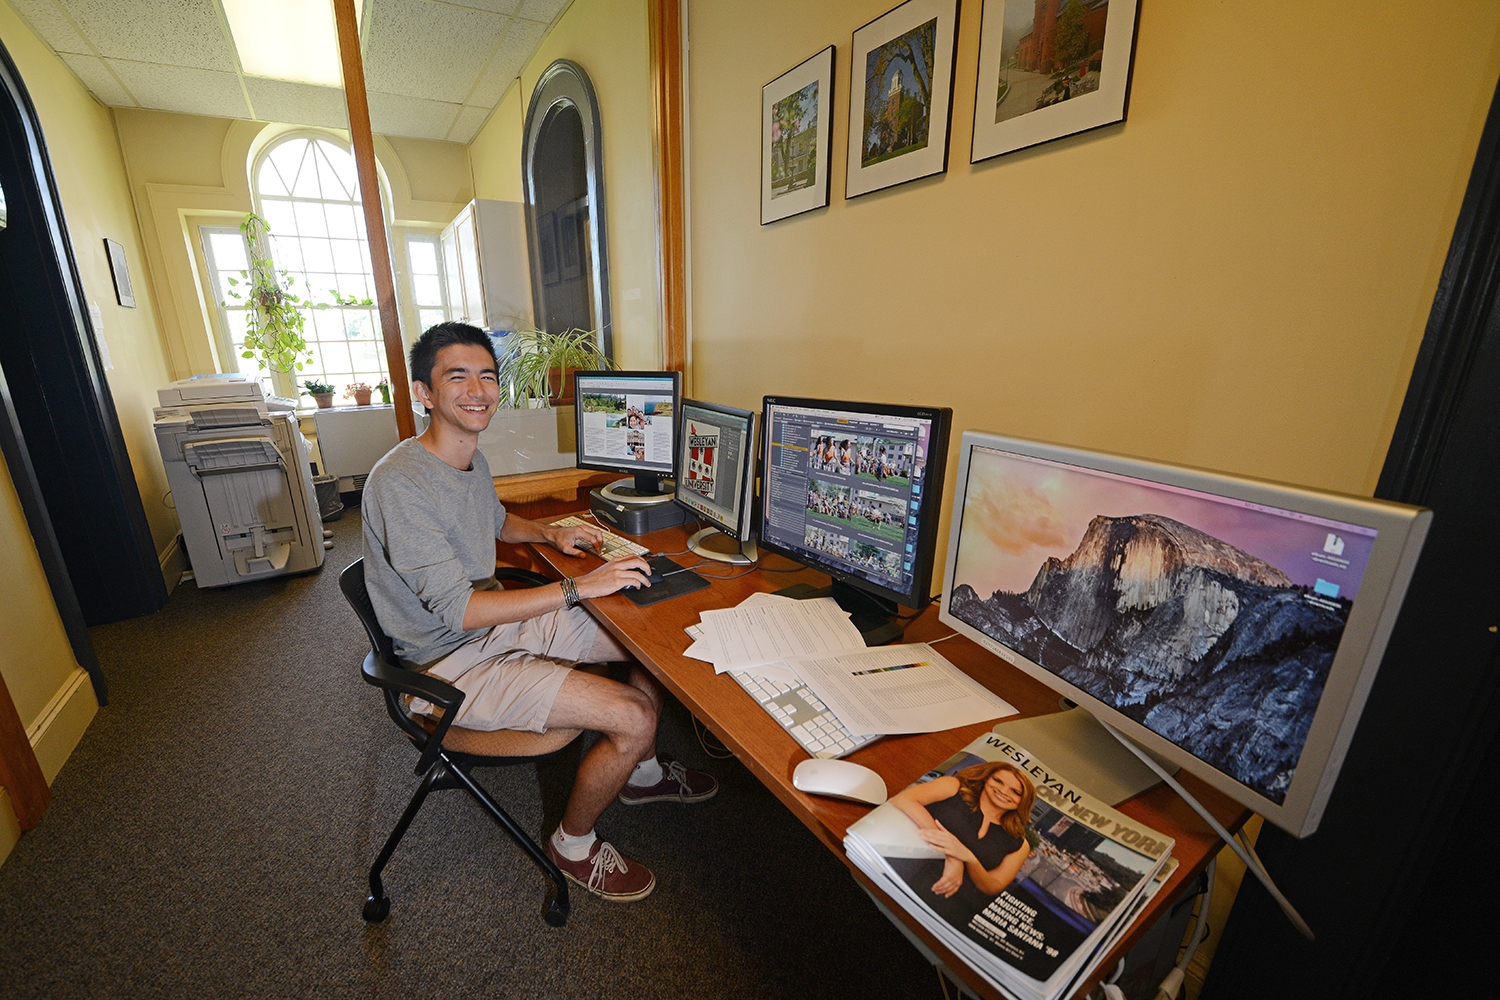 During the year, College of Social Studies (CSS) major Ryden Nelson '16 is employed by the CSS and Pi Cafe, but he is working in the Office of University Communications as a publication production assistant for the summer. He helps proof and format the print media produced by the office for all the other departments on campus. "I like this job because gives me a look into how the school tries to present itself to the community and the wider public. And I'm learning a fair bit about InDesign and Photoshop when I'm working on the more creative projects."